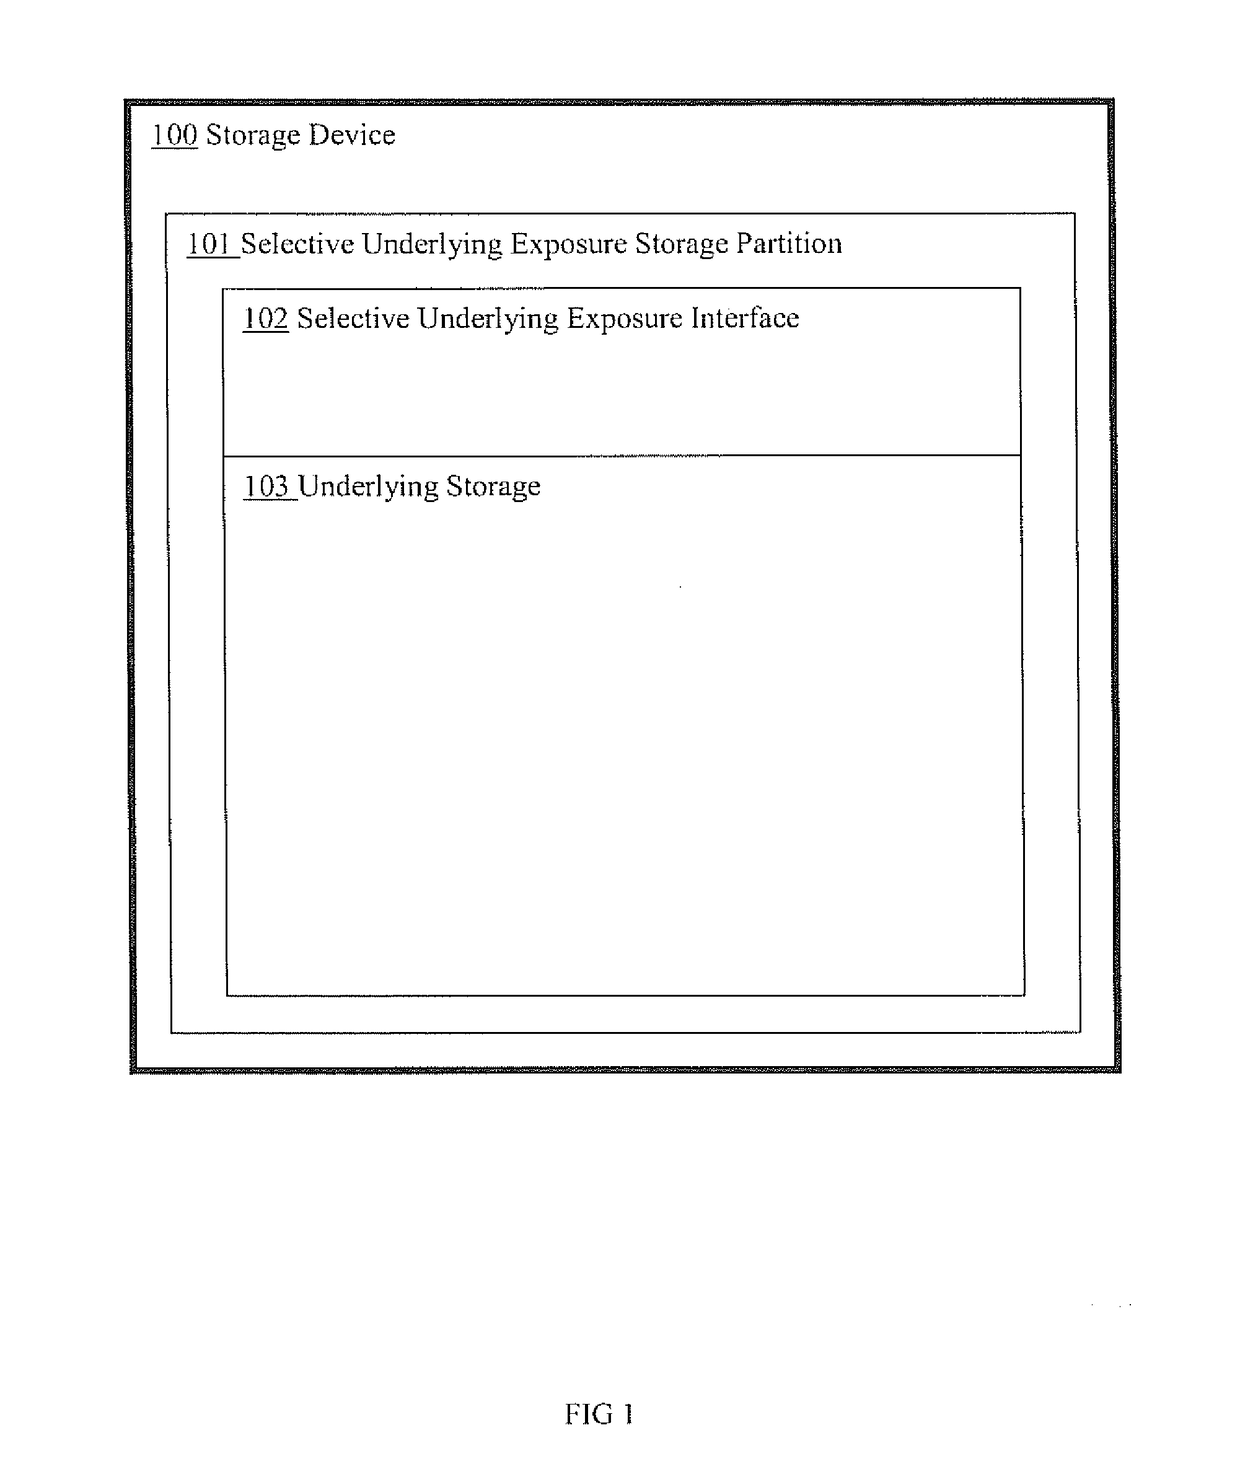 Selective underlying exposure storage mapping